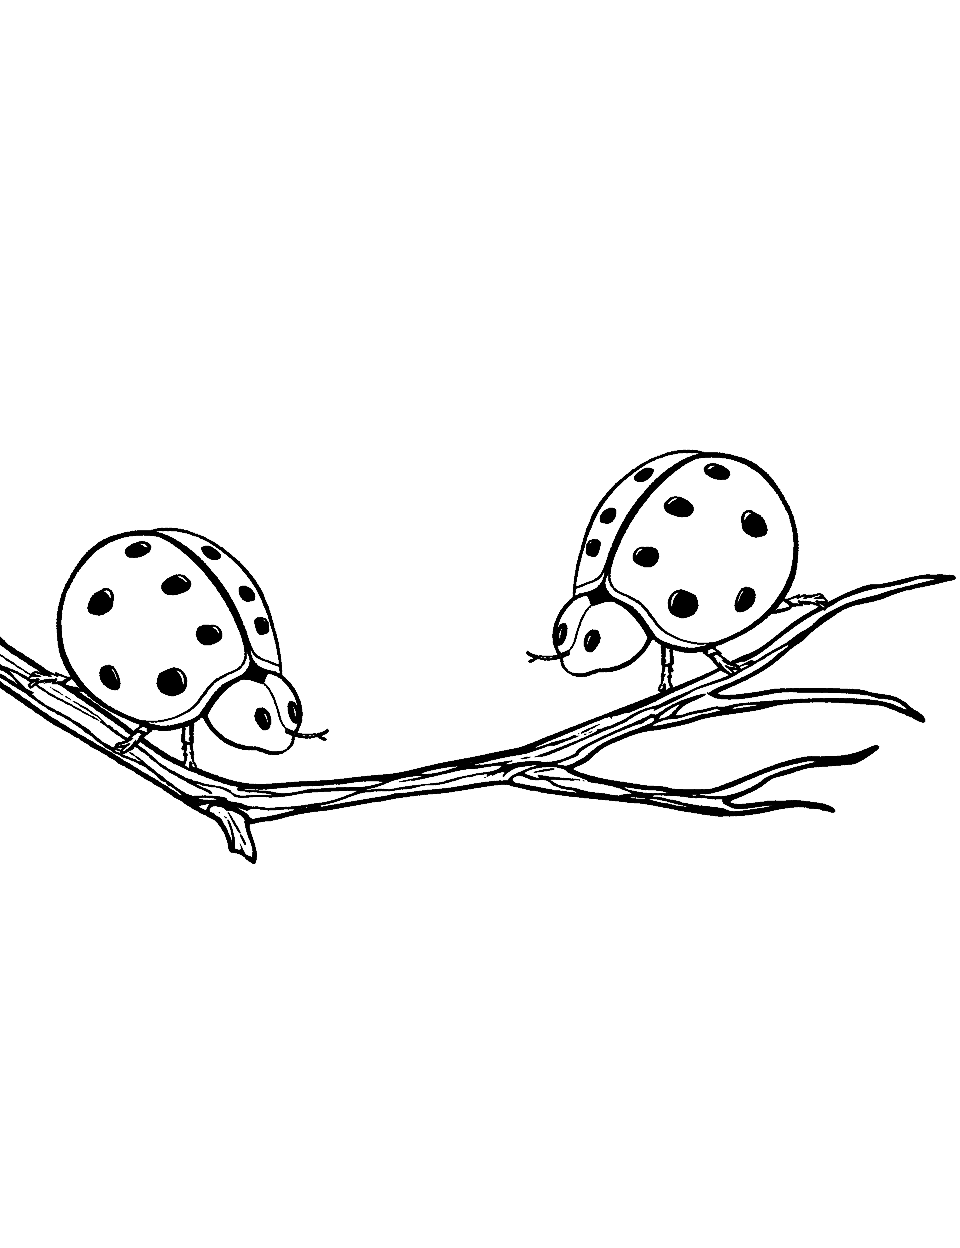 Ladybird Beetle Friends Meeting Ladybug Coloring Page - A scene where two Ladybird beetles meet each other on a branch.